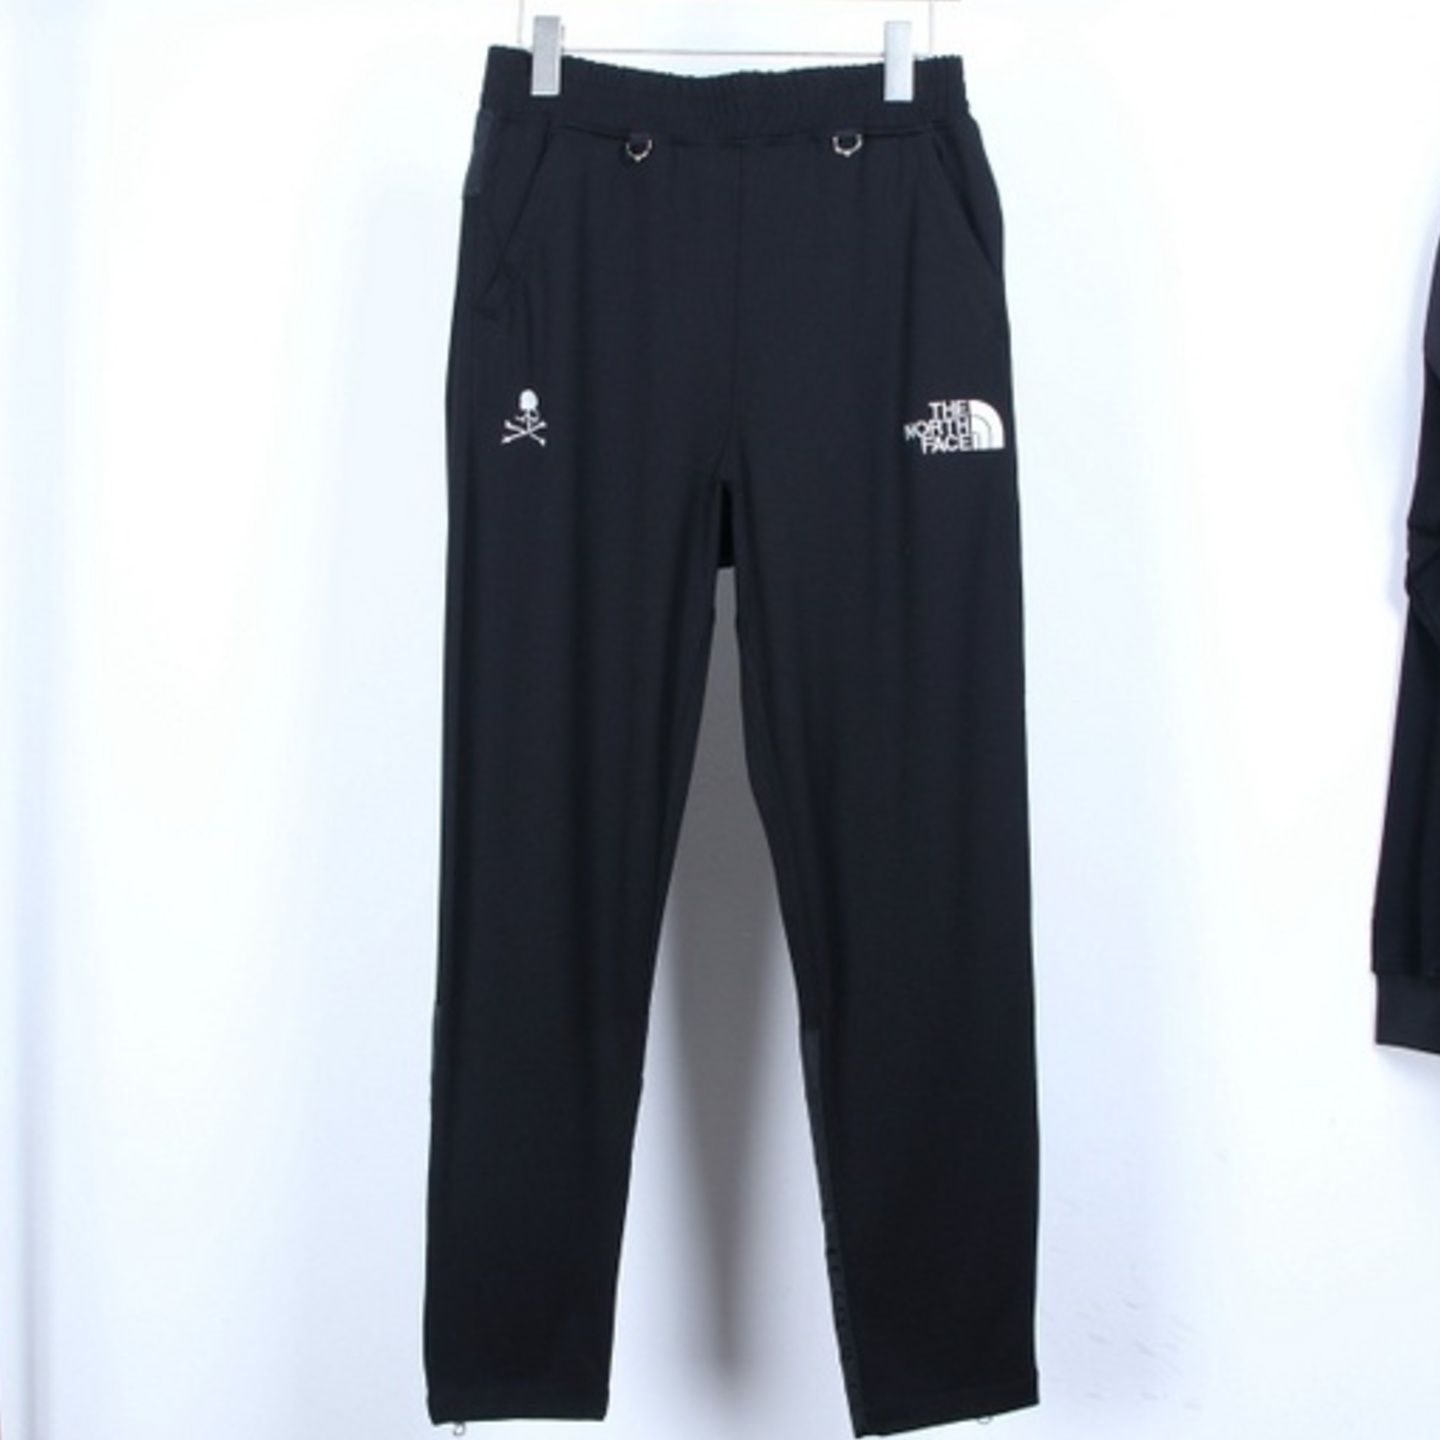 Mastermind The North Face Zipper FW18 Pants